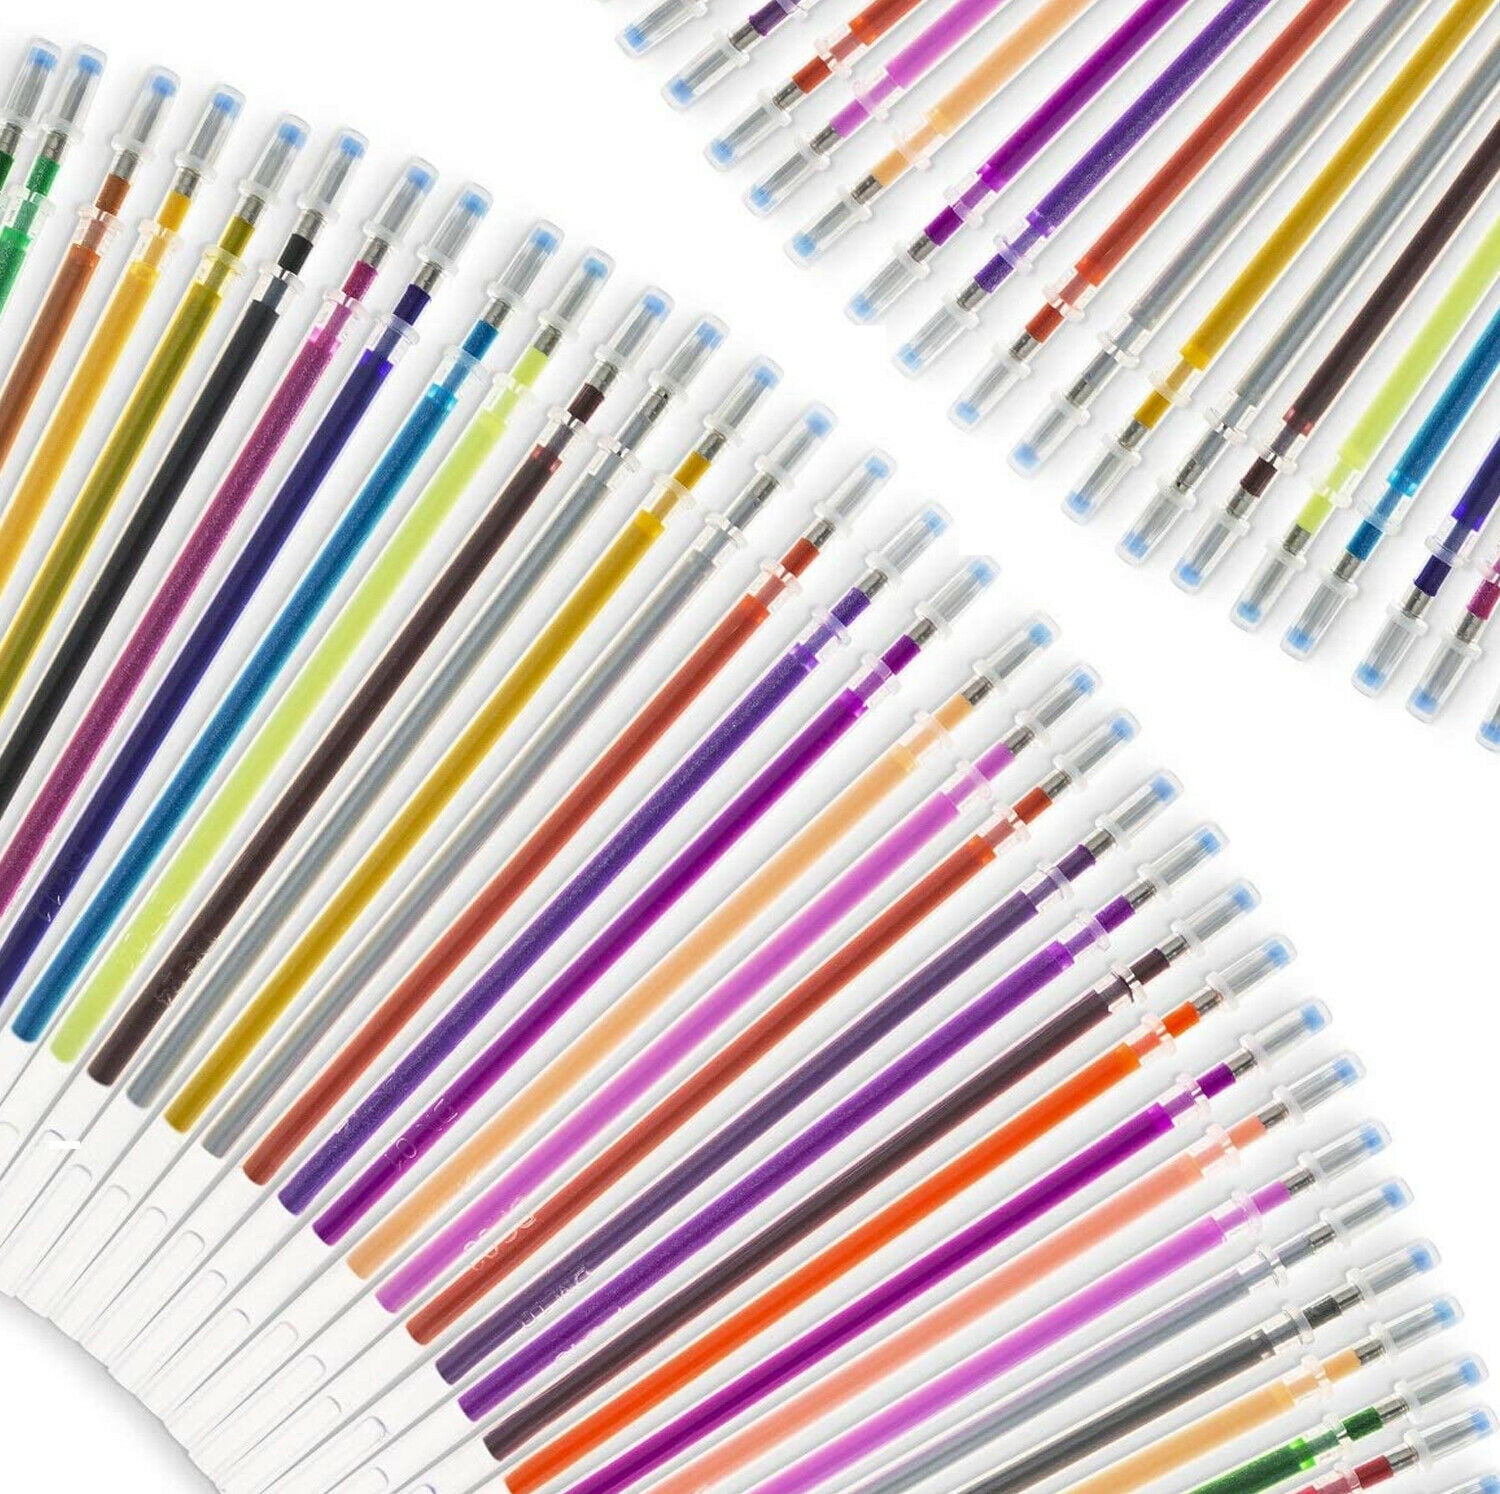 Nylea 100 Pack Glitter Gel Pens for Adult Coloring with Silk